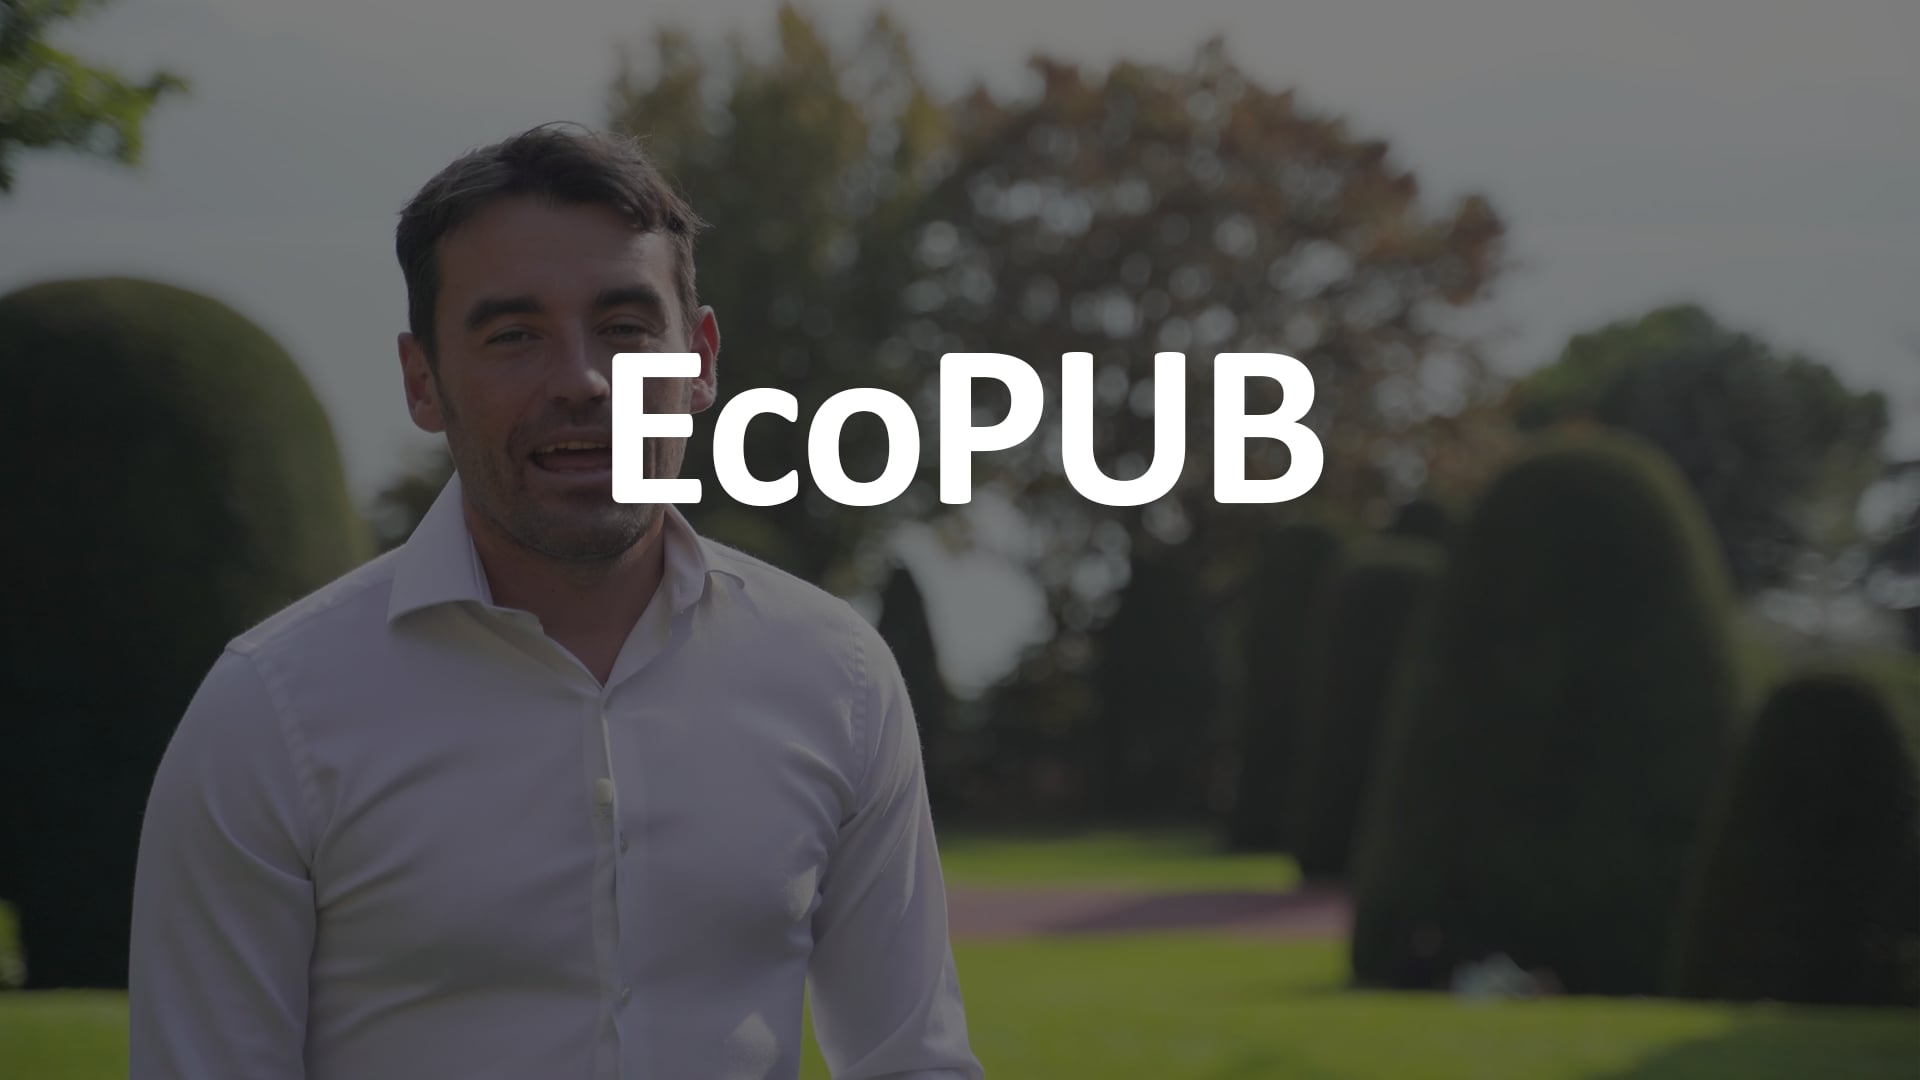 EcoPUB Initiative for Sustainable Advertisements